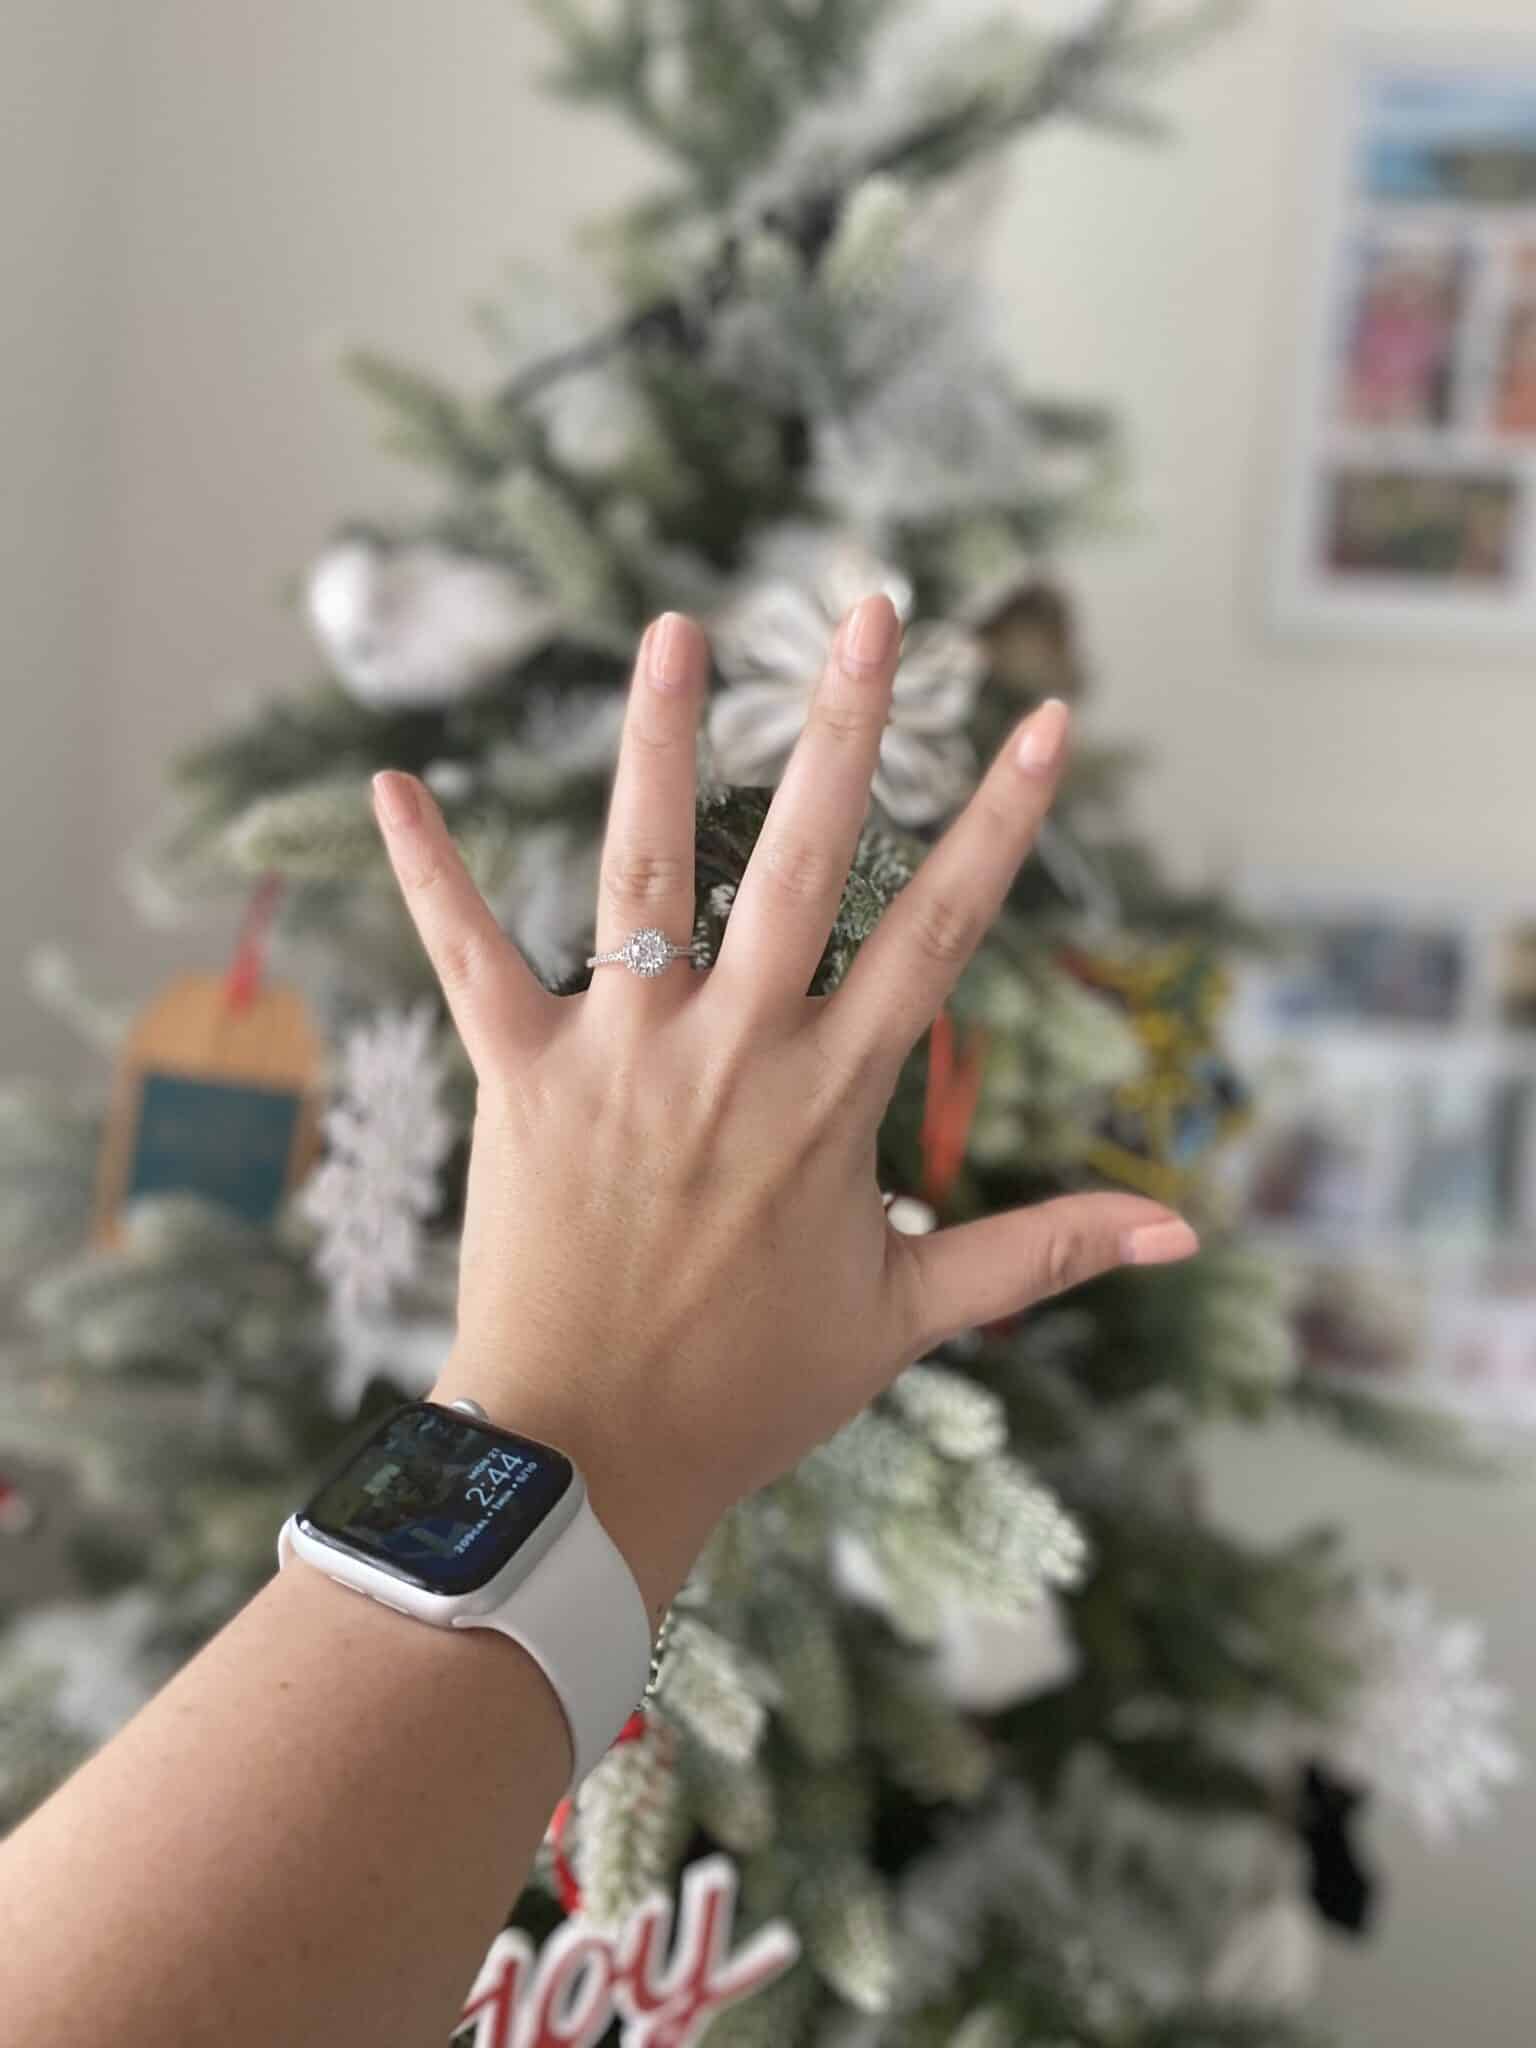 person holds out hand in front of christmas tree wearing apple watch with new engagement ring on hand